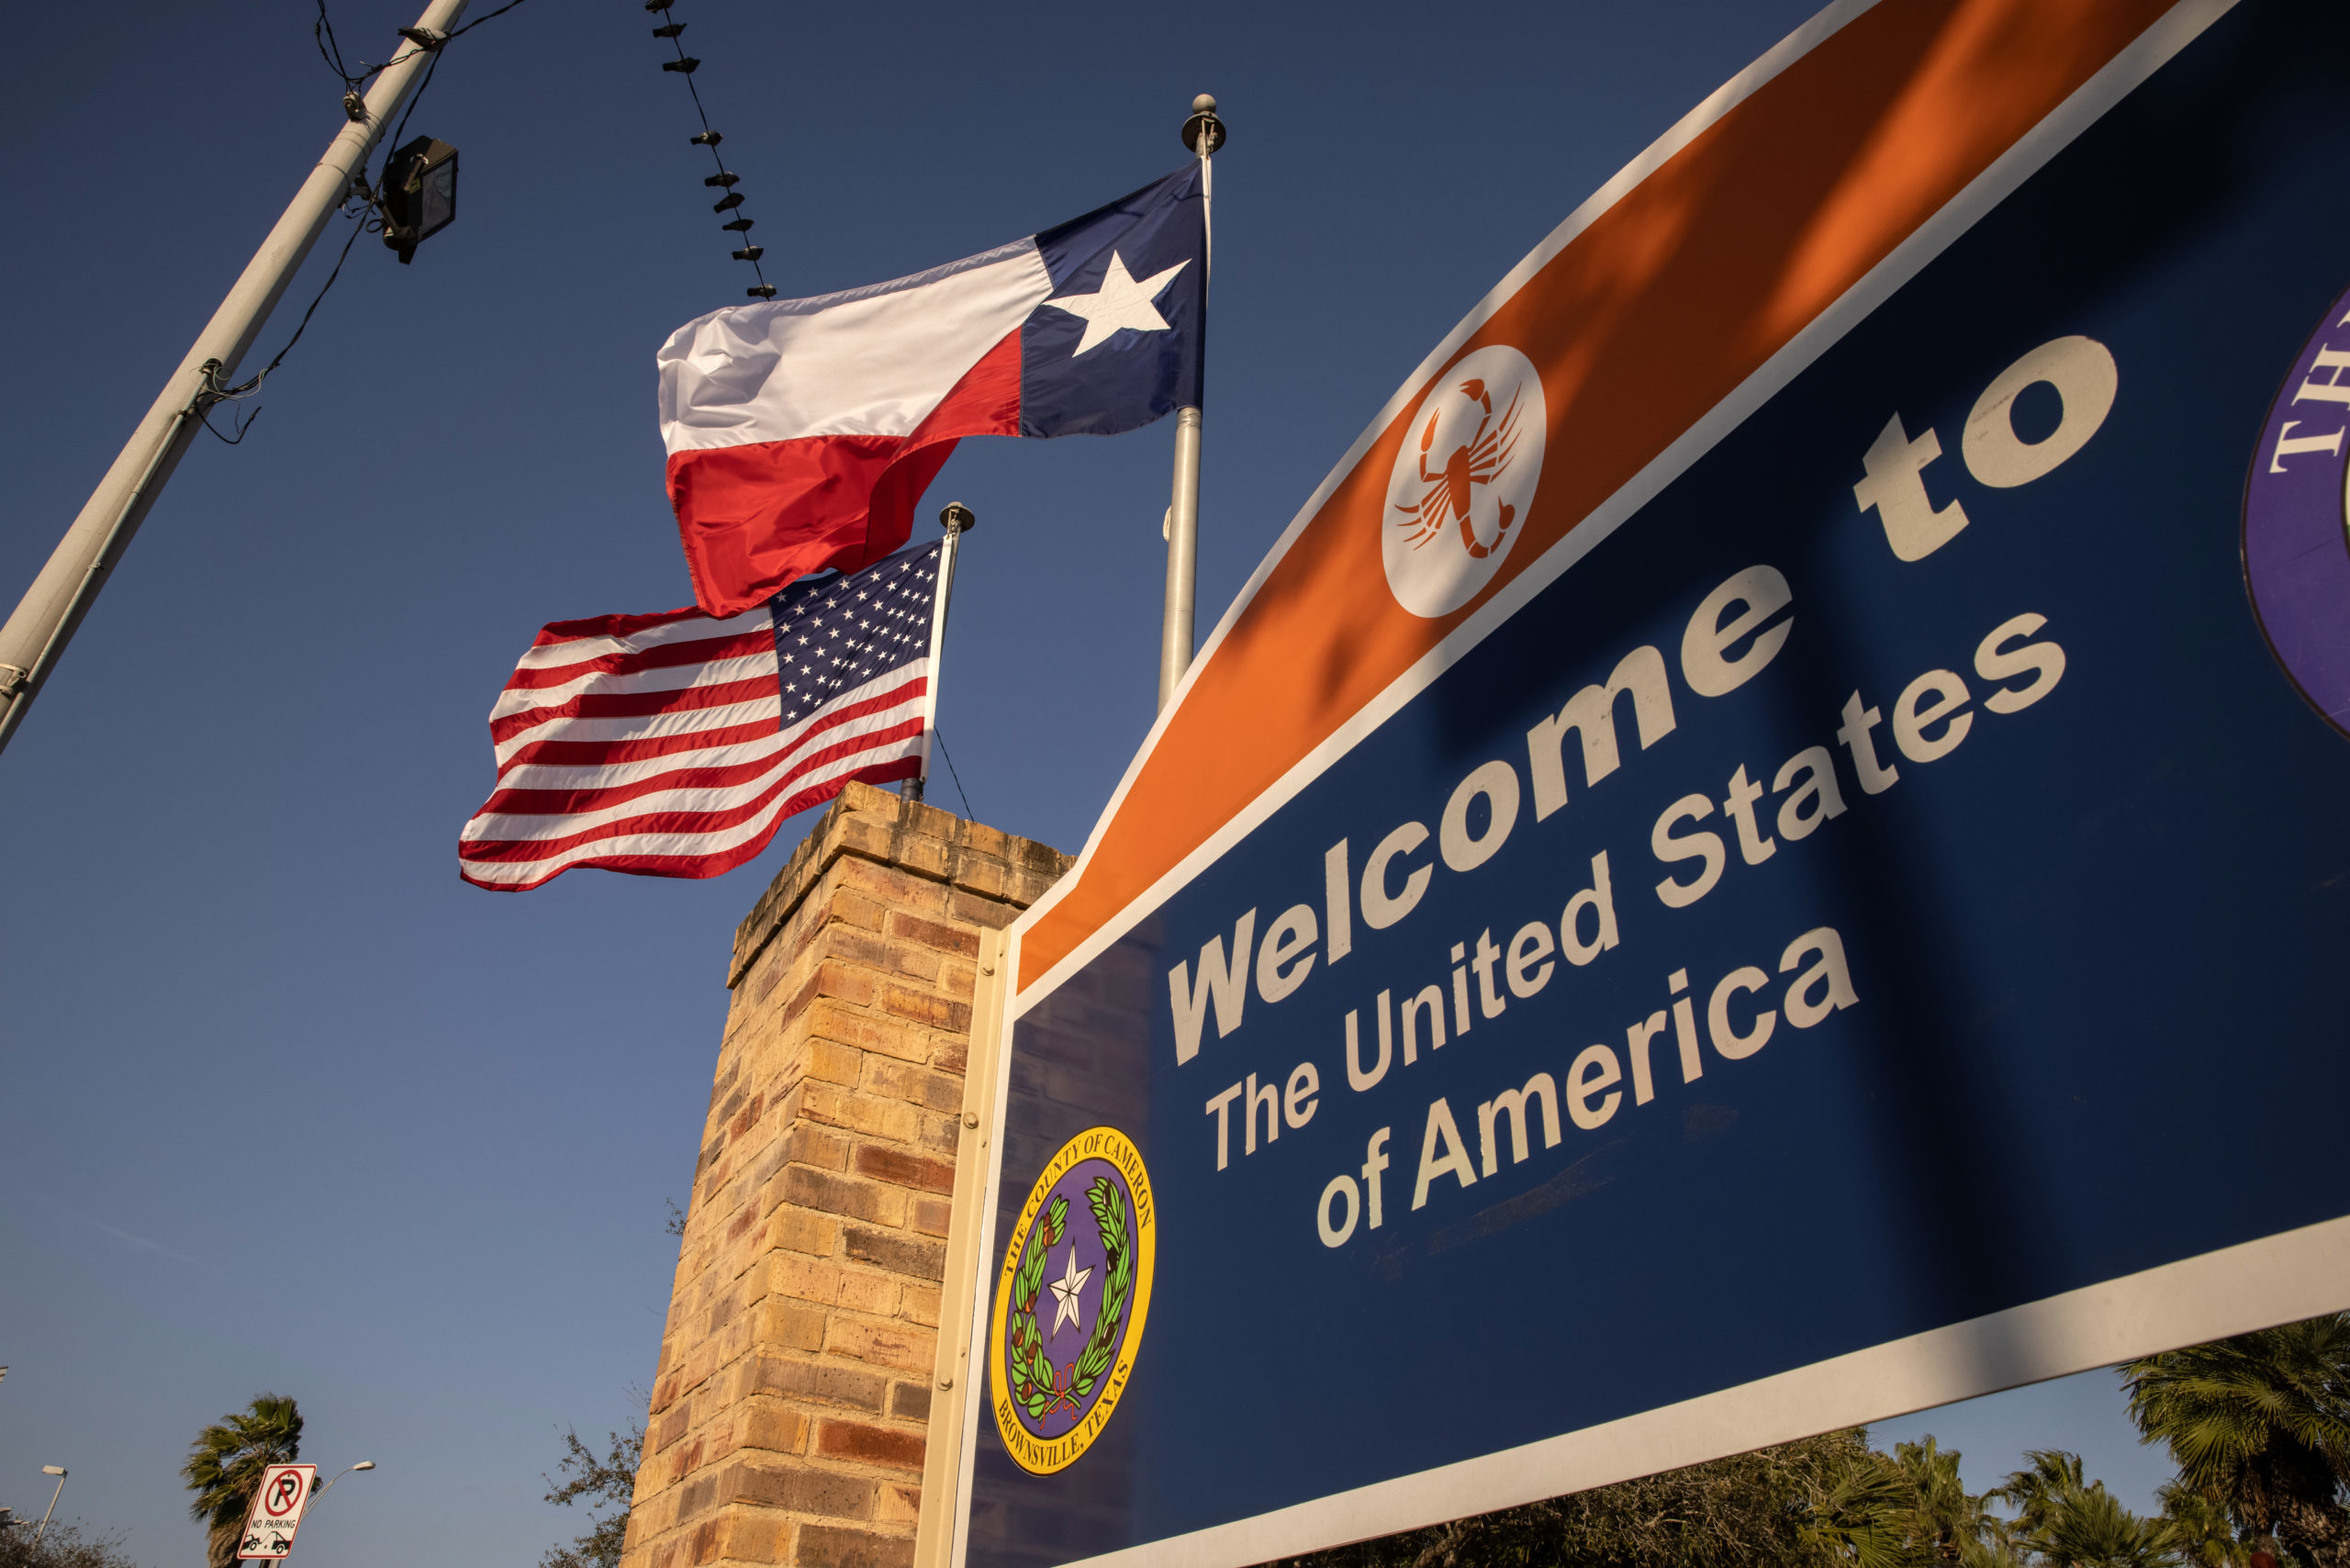 BROWNSVILLE, TEXAS - FEBRUARY 24: The U.S. and Texas flags fly near the U.S.-Mexico border on February 24, 2021 in Brownsville, Texas. (Photo by John Moore/Getty Images)